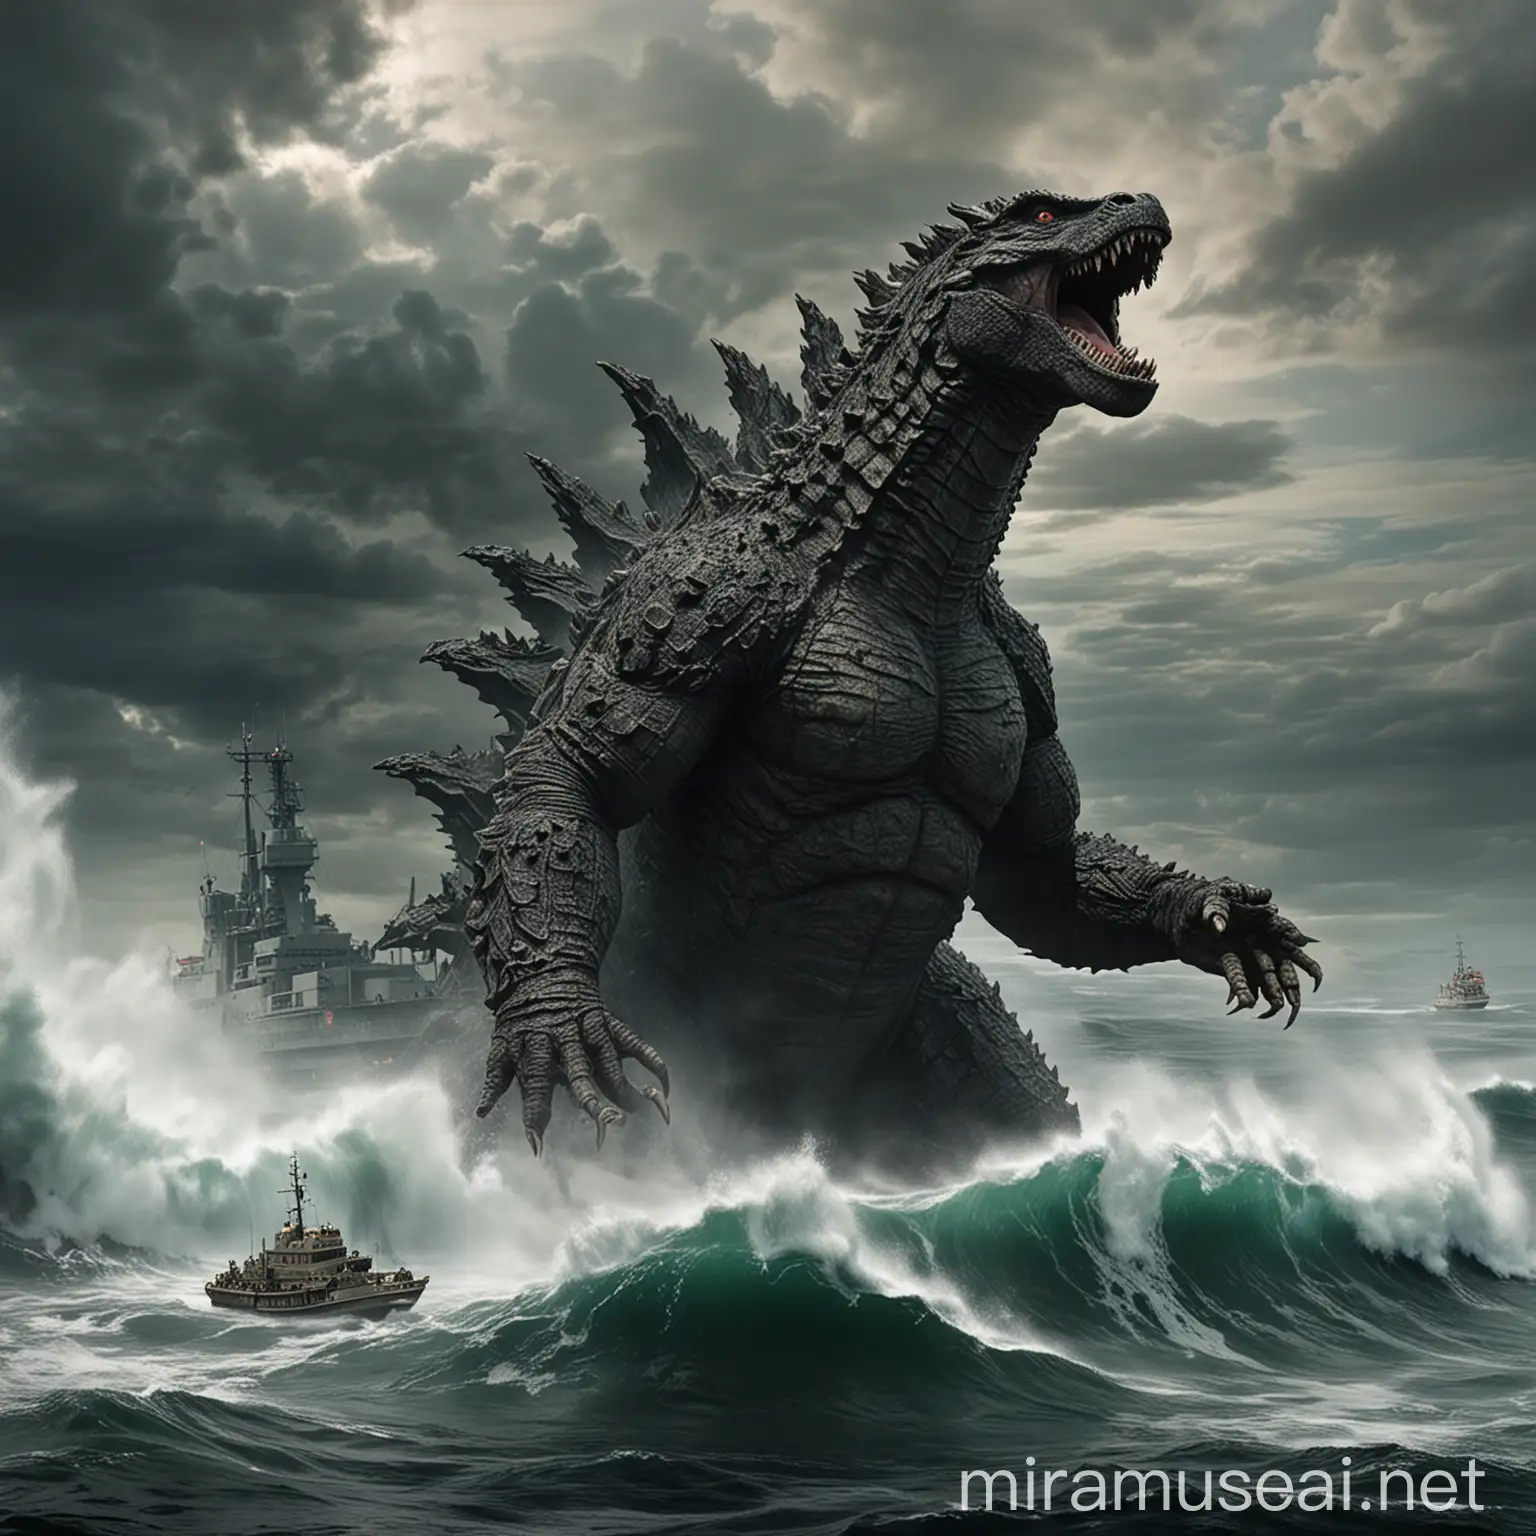 Majestic Godzilla Emerges from the Depths of the Sea